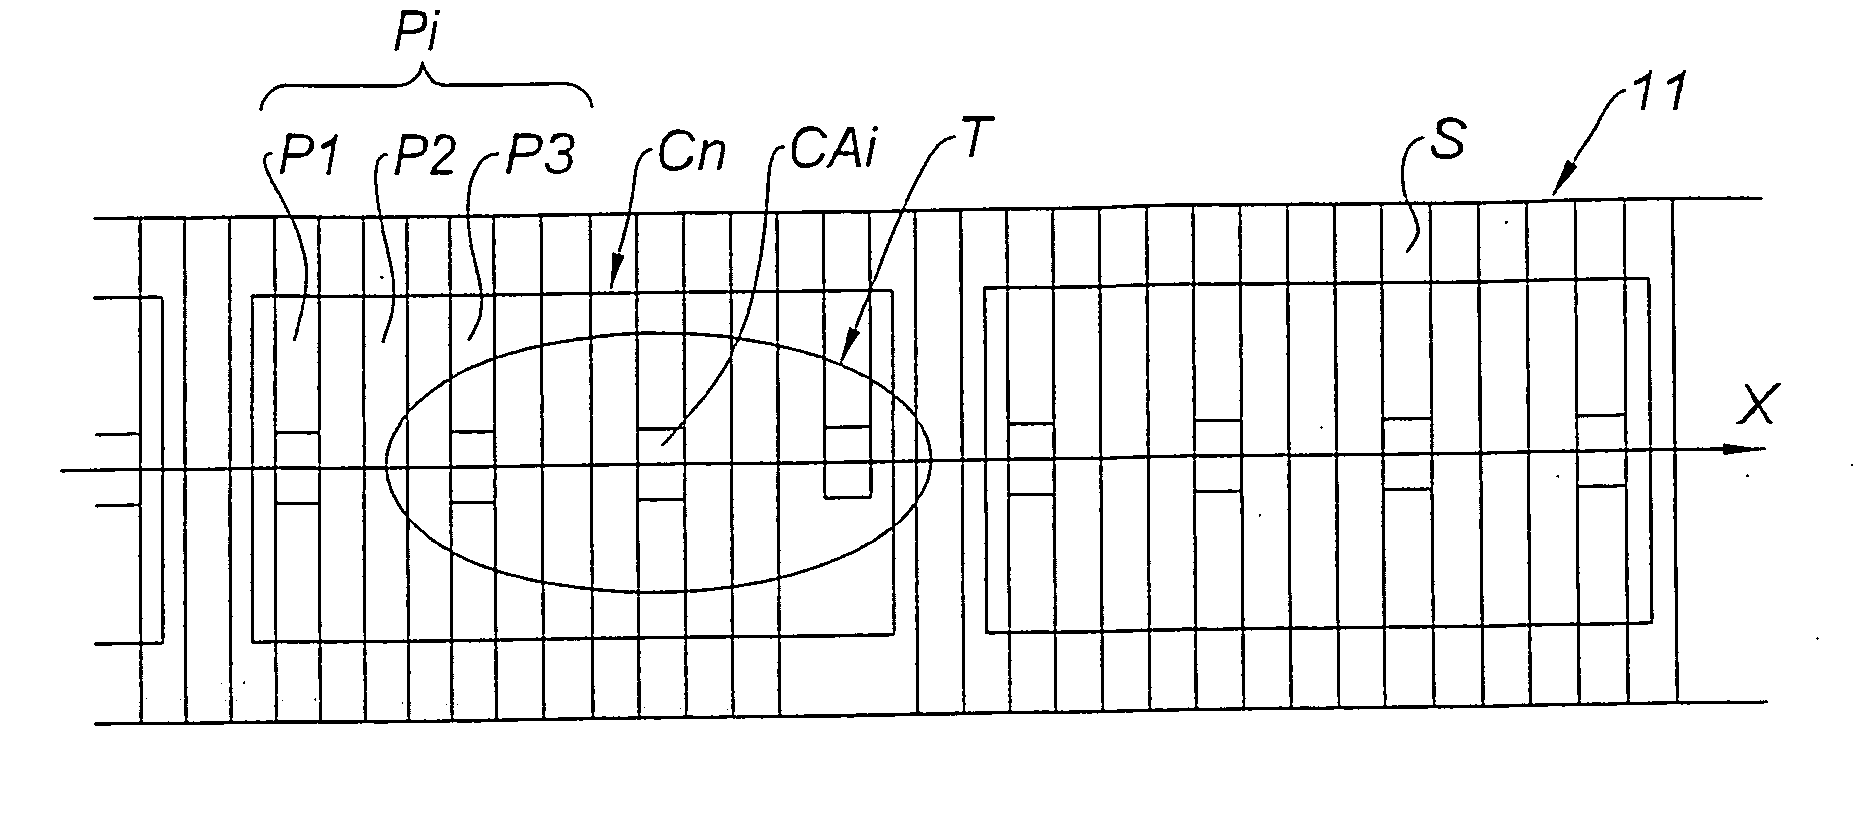 Capacitive sensor to detect a finger for a control or command operation